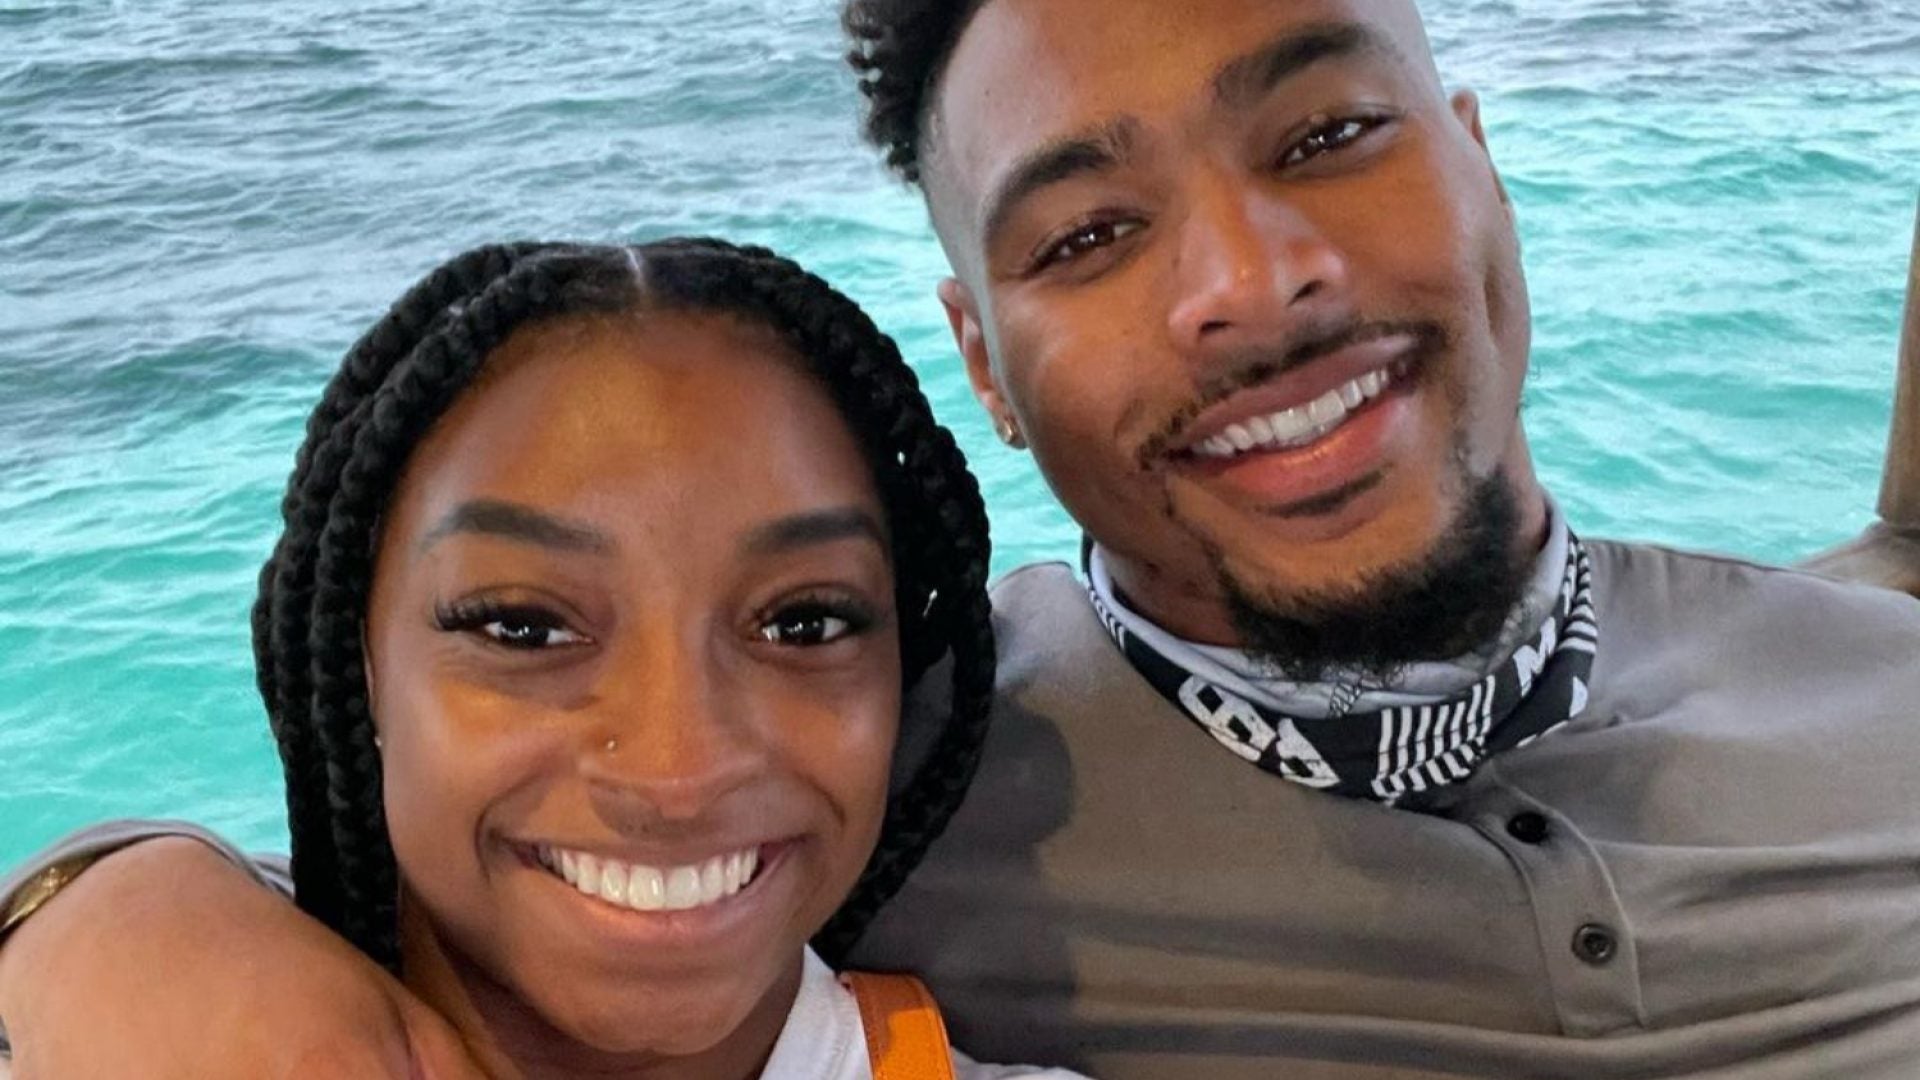 Simone Biles' Boyfriend Publicly Praises Her Amid Support, Criticism: 'Imma Ride With You Through Whatever'